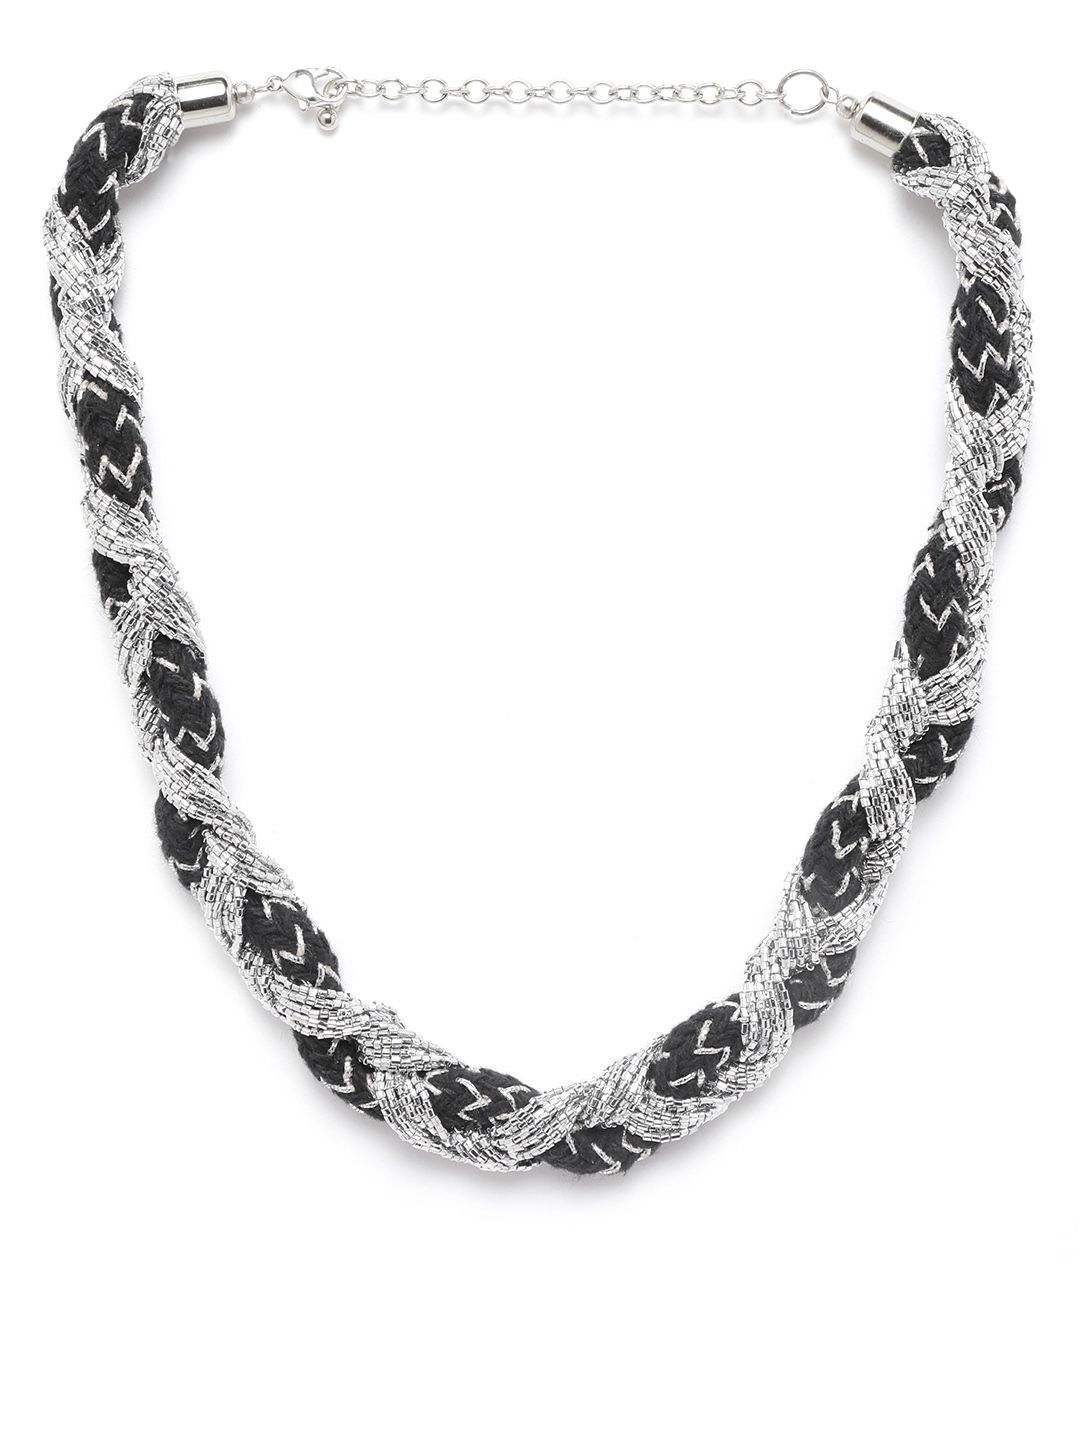 RICHEERA Black & Silver-Toned Beaded Necklace Price in India